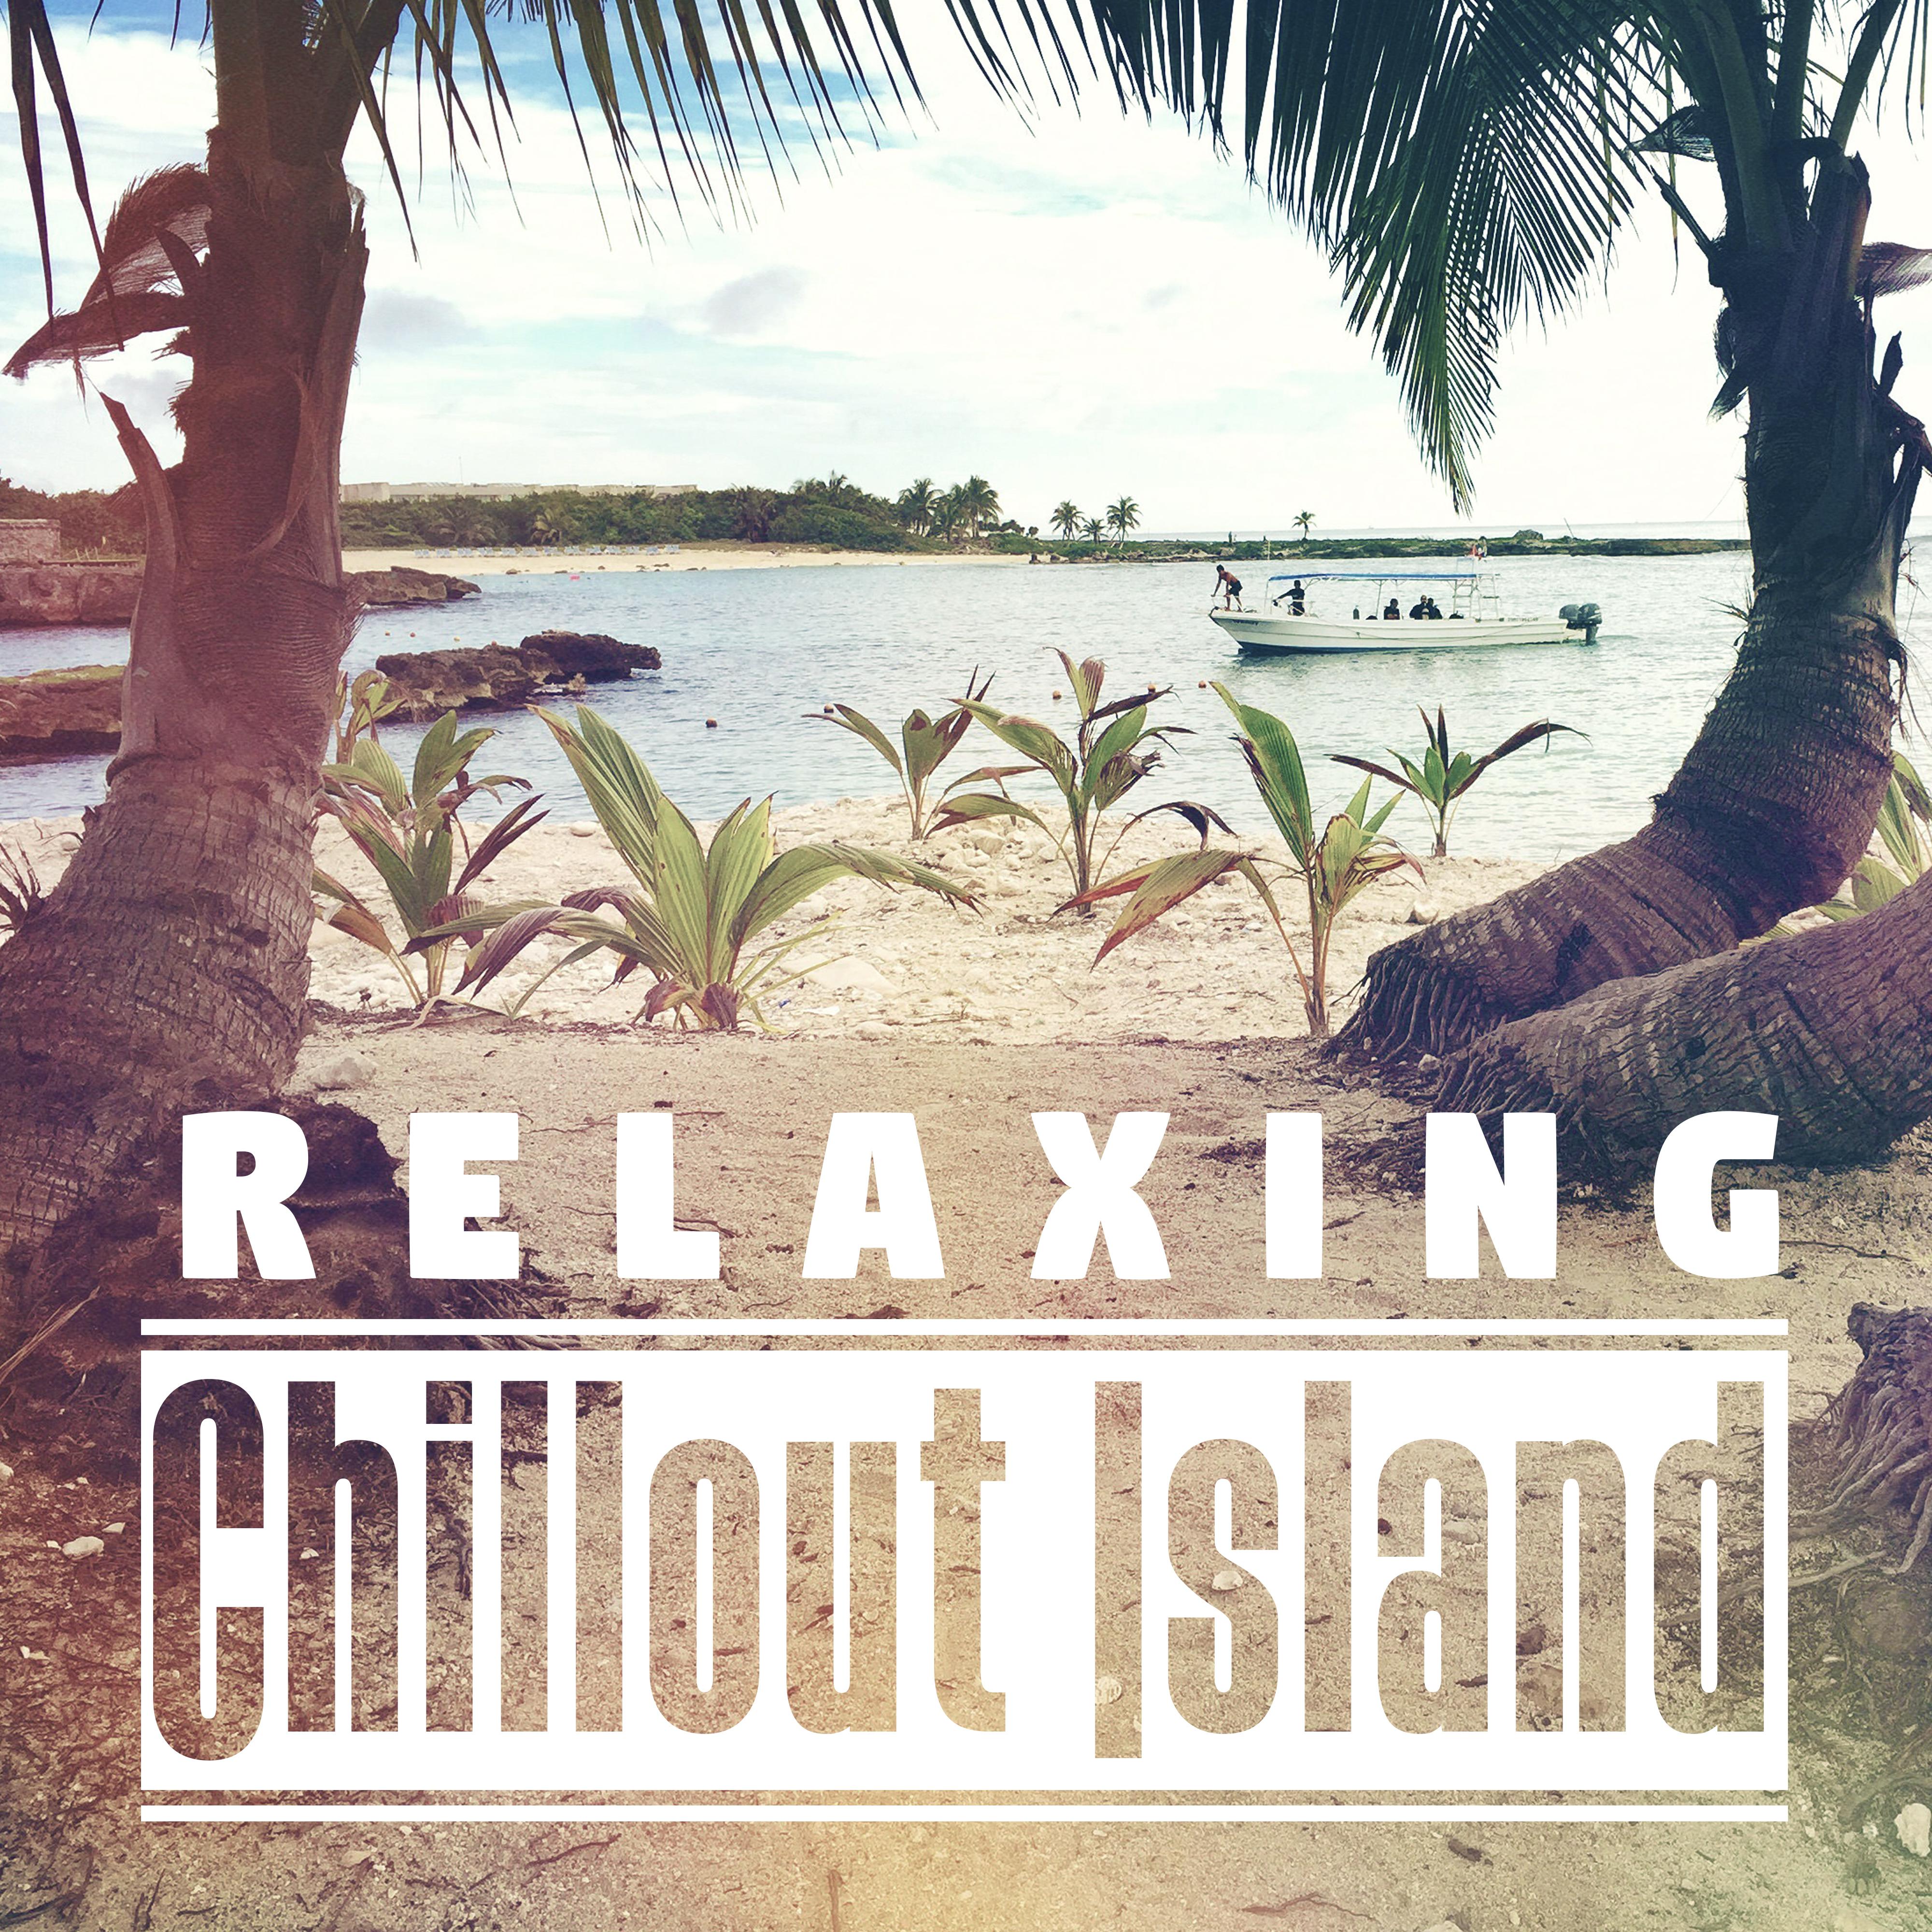 Relaxing Chillout Island – Deep Chill, Rest & Relax, Island Relaxing Sounds, Music to Calm Down